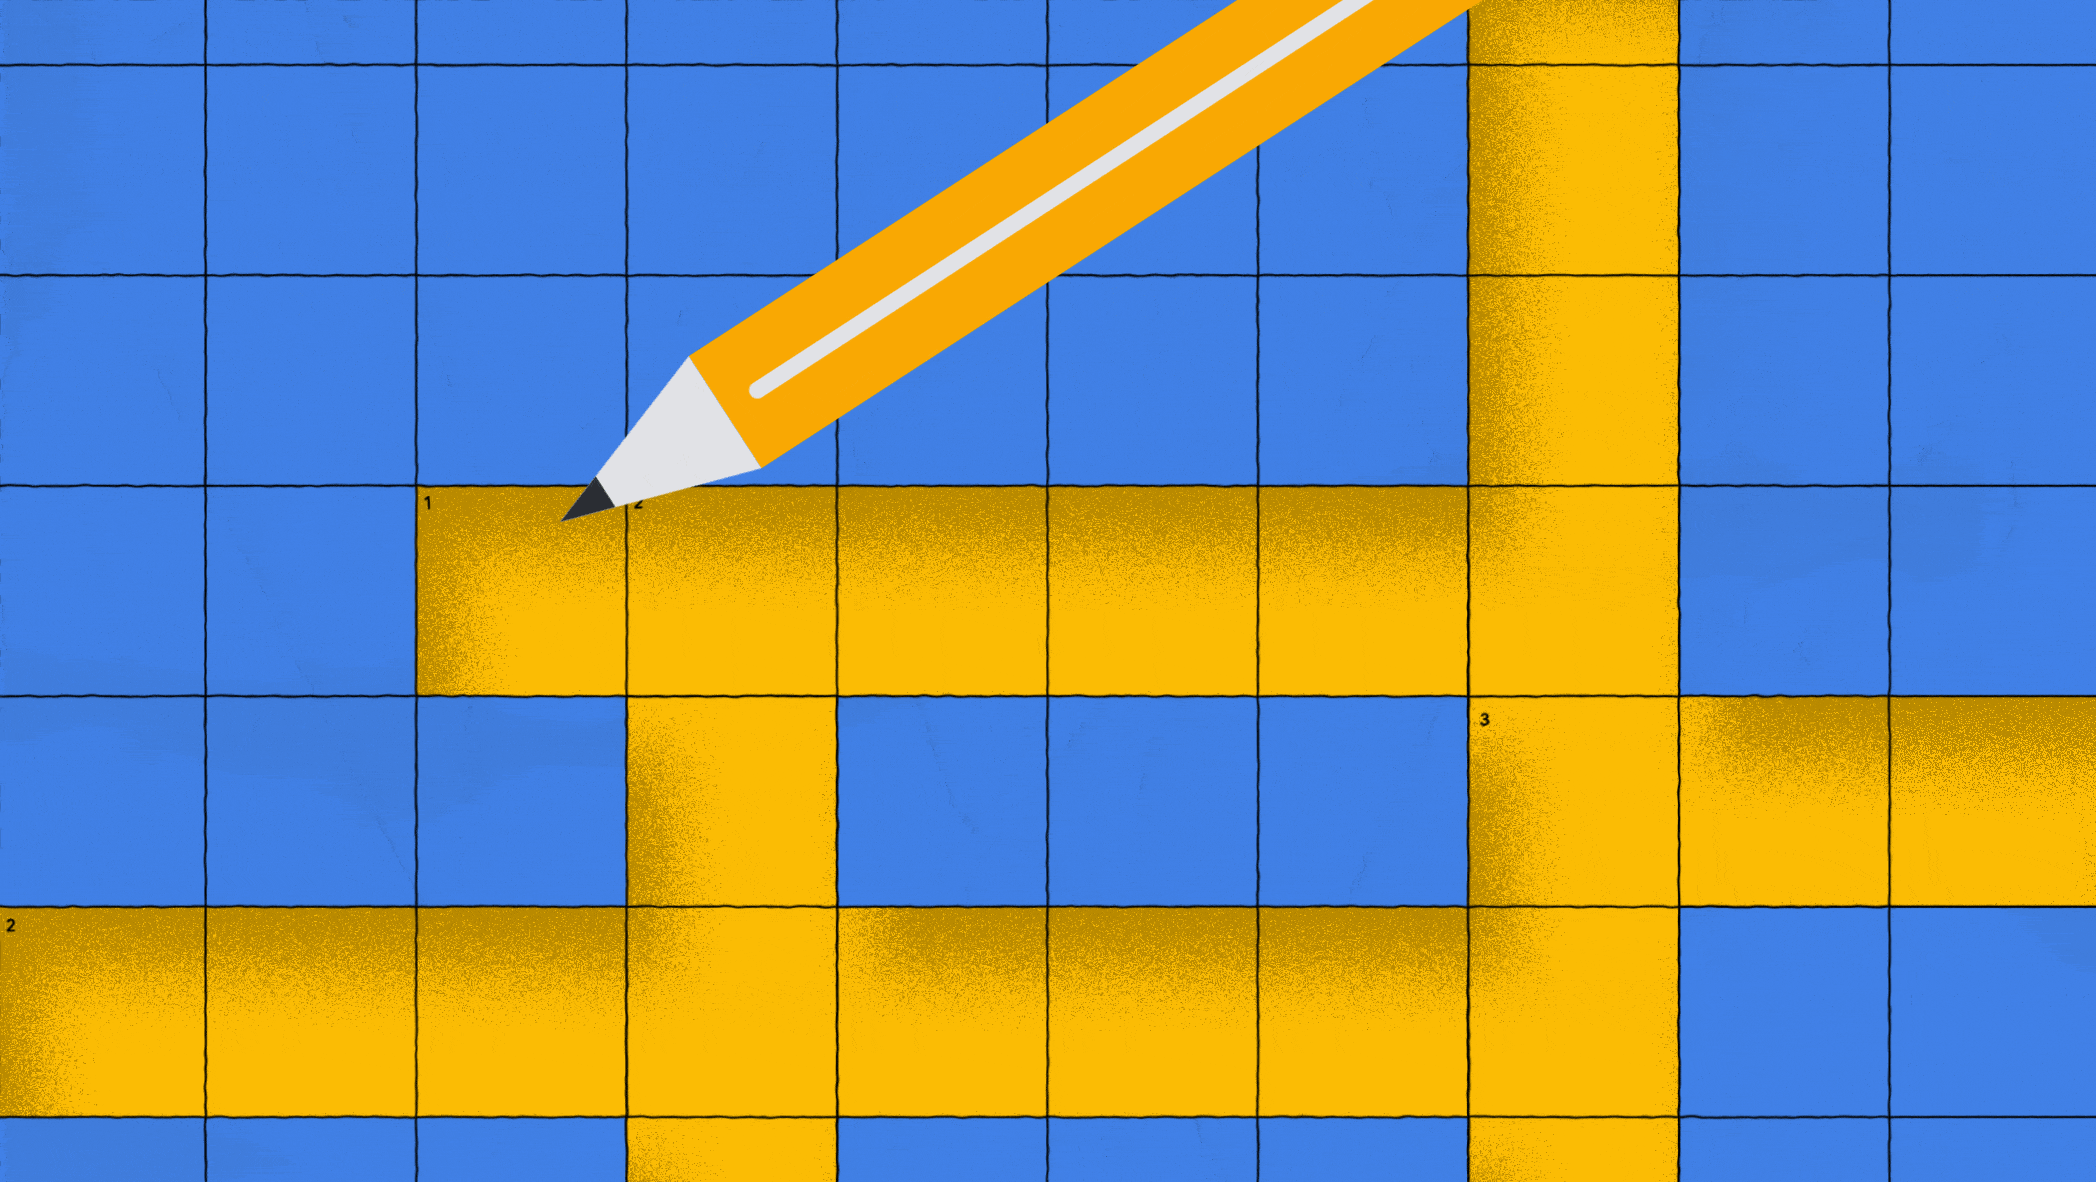 Animated GIF showing a crossword puzzle with the word "Google" being spelled out with a pencil.